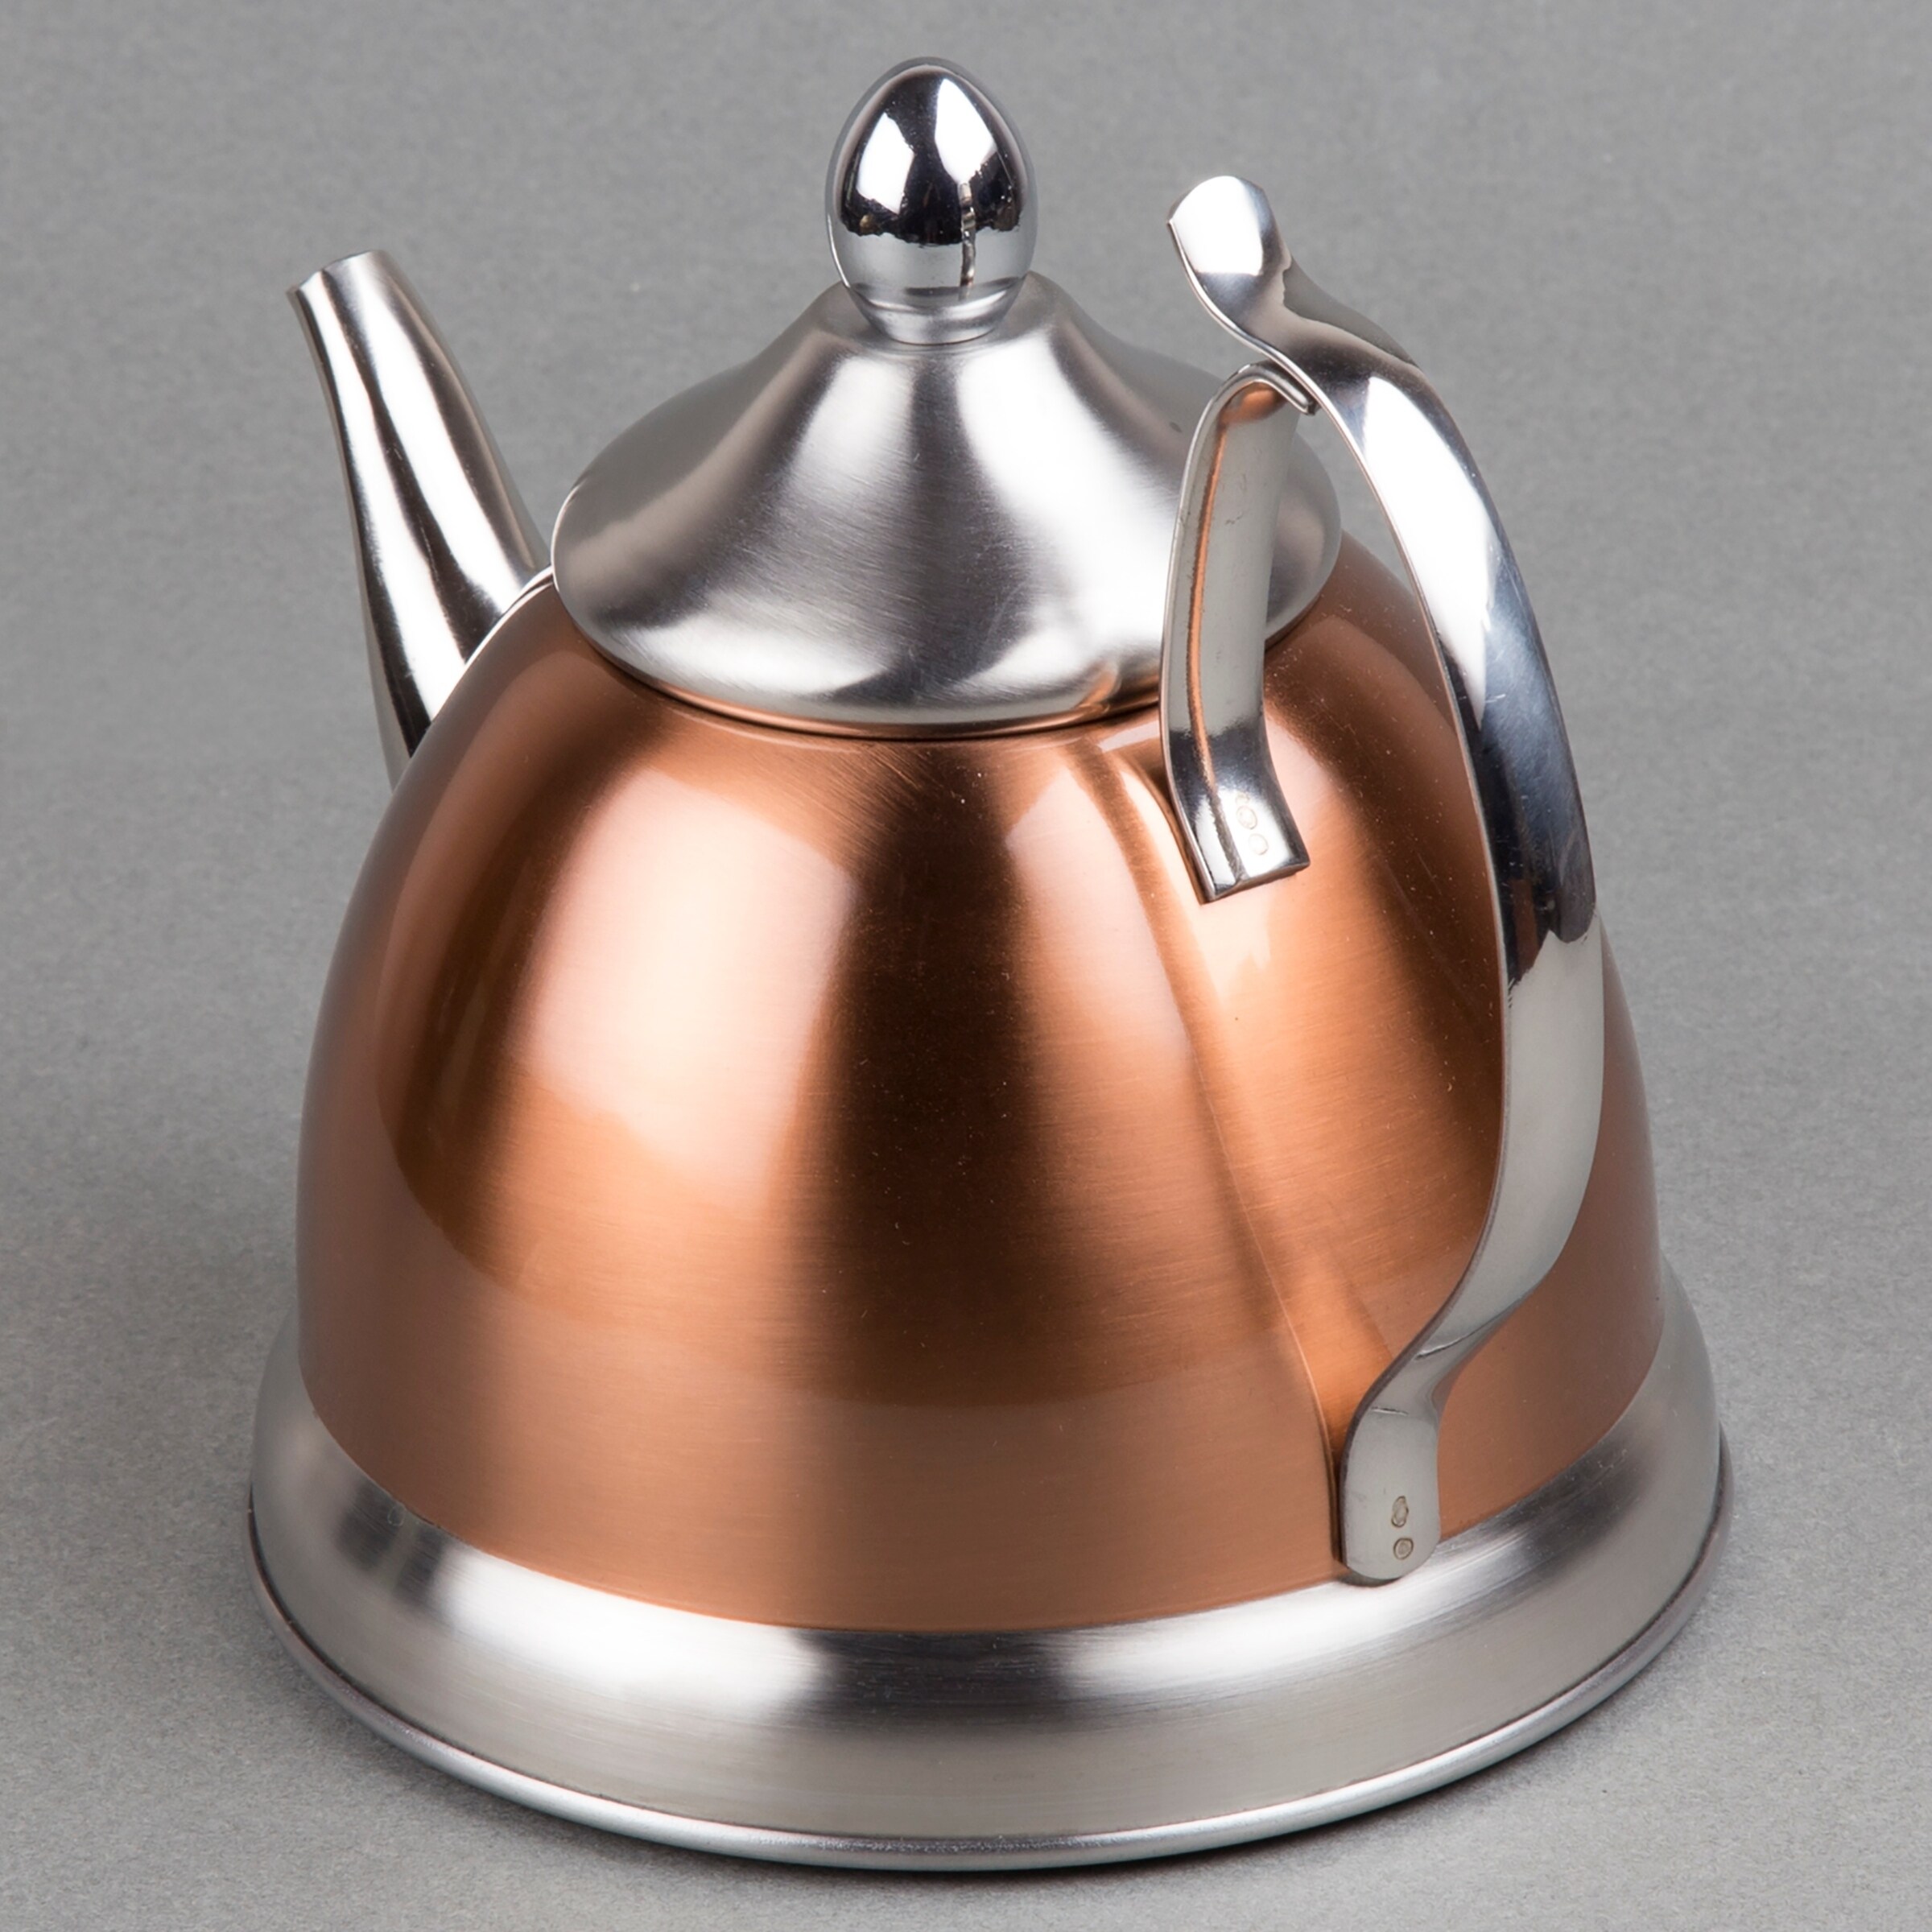 https://ak1.ostkcdn.com/images/products/30551788/Creative-Home-1.0-Qt.-Nobili-Stainless-Steel-Copper-Tea-Kettle-with-Removable-Infuser-Basket-1b2624ba-d661-4a3a-babf-1395459677d6.jpg